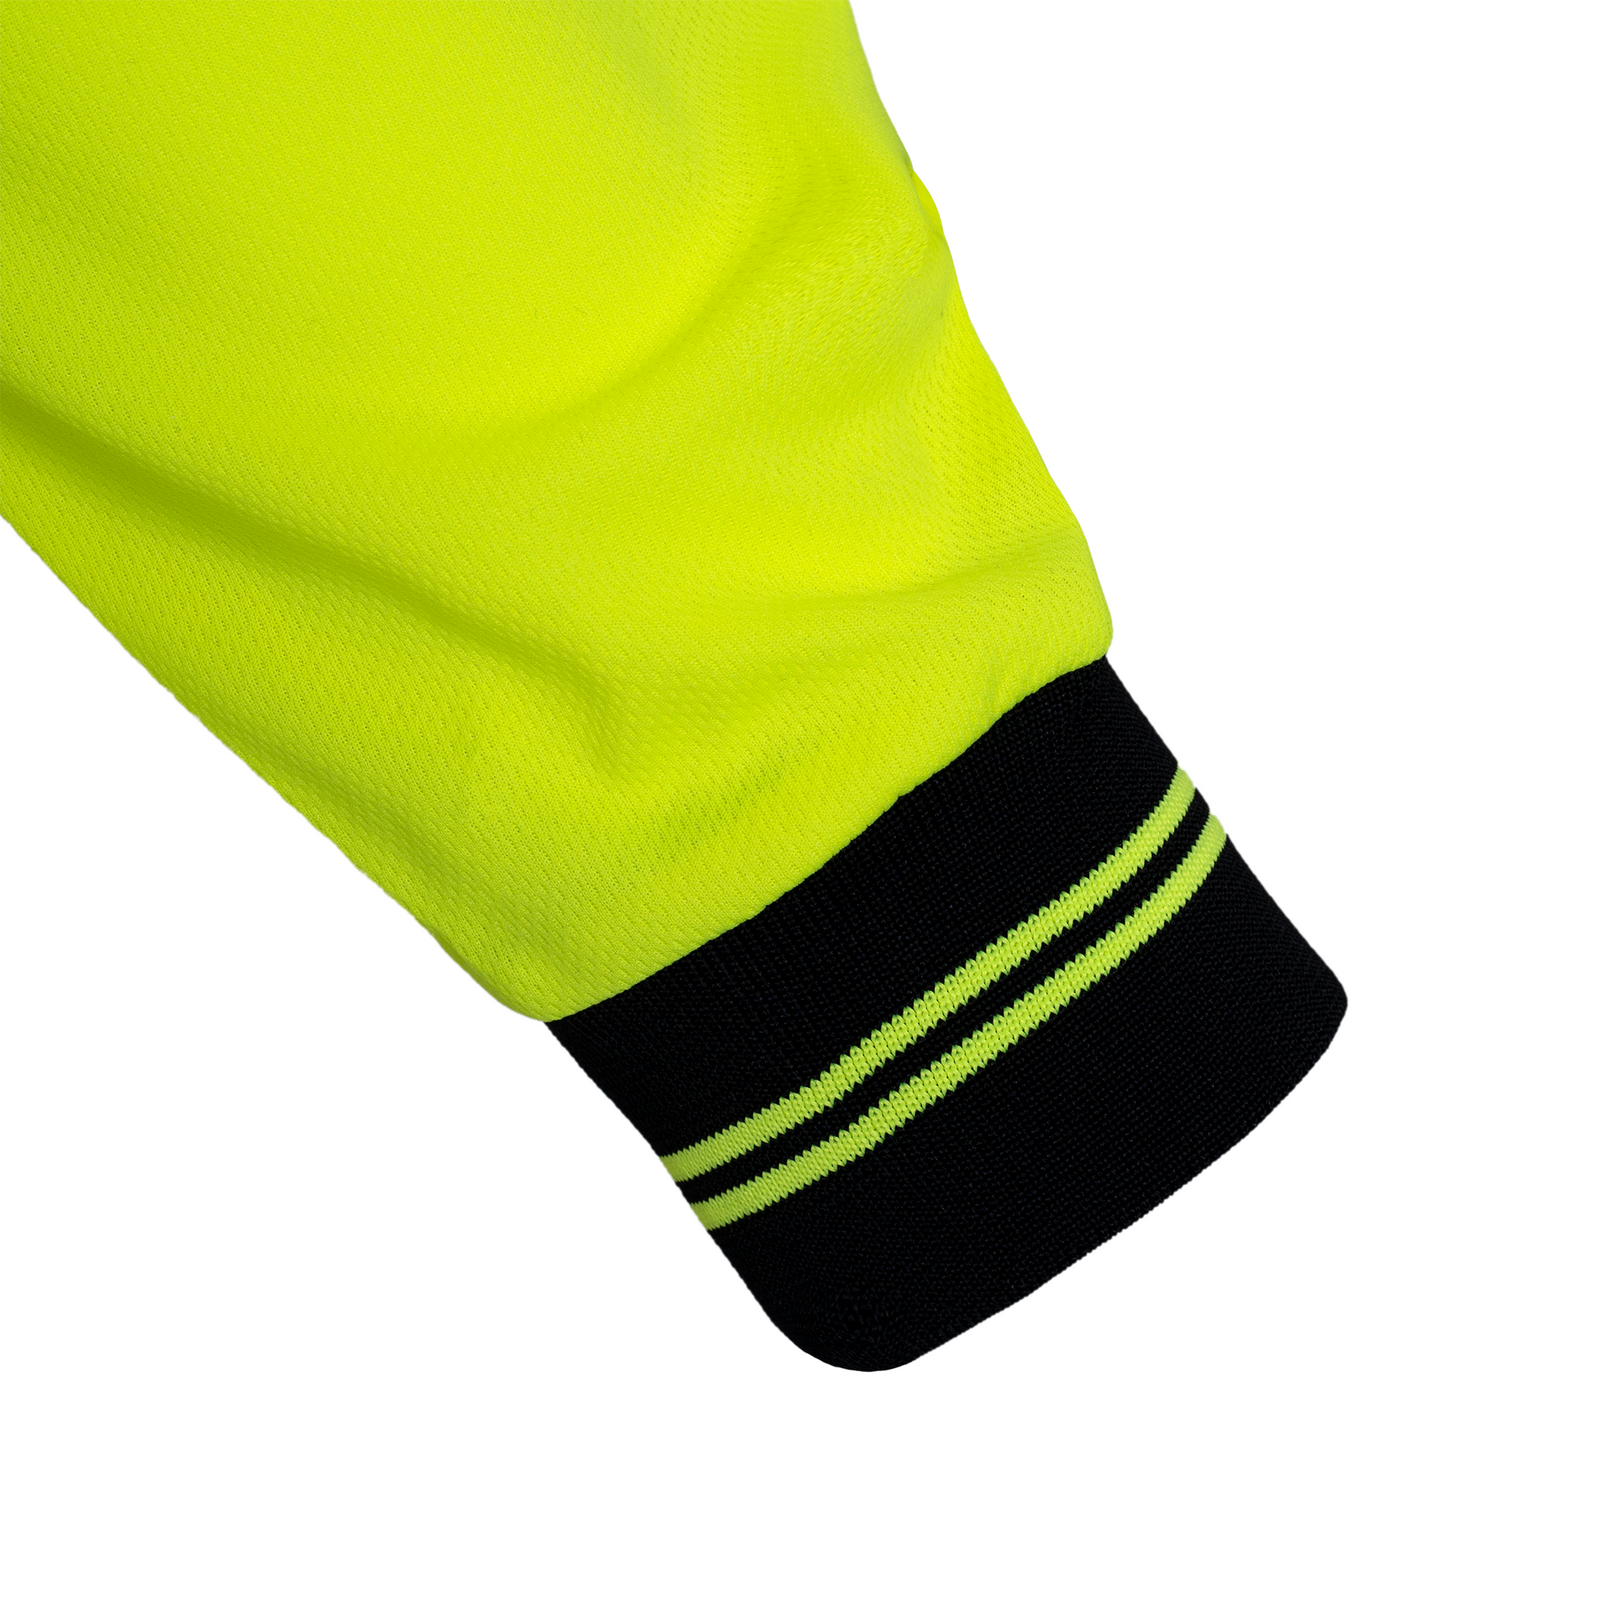 Close up of the sleeve and the knitted cuff on the JORESTECH® Yellow long sleeve ANSI reflective Shirt